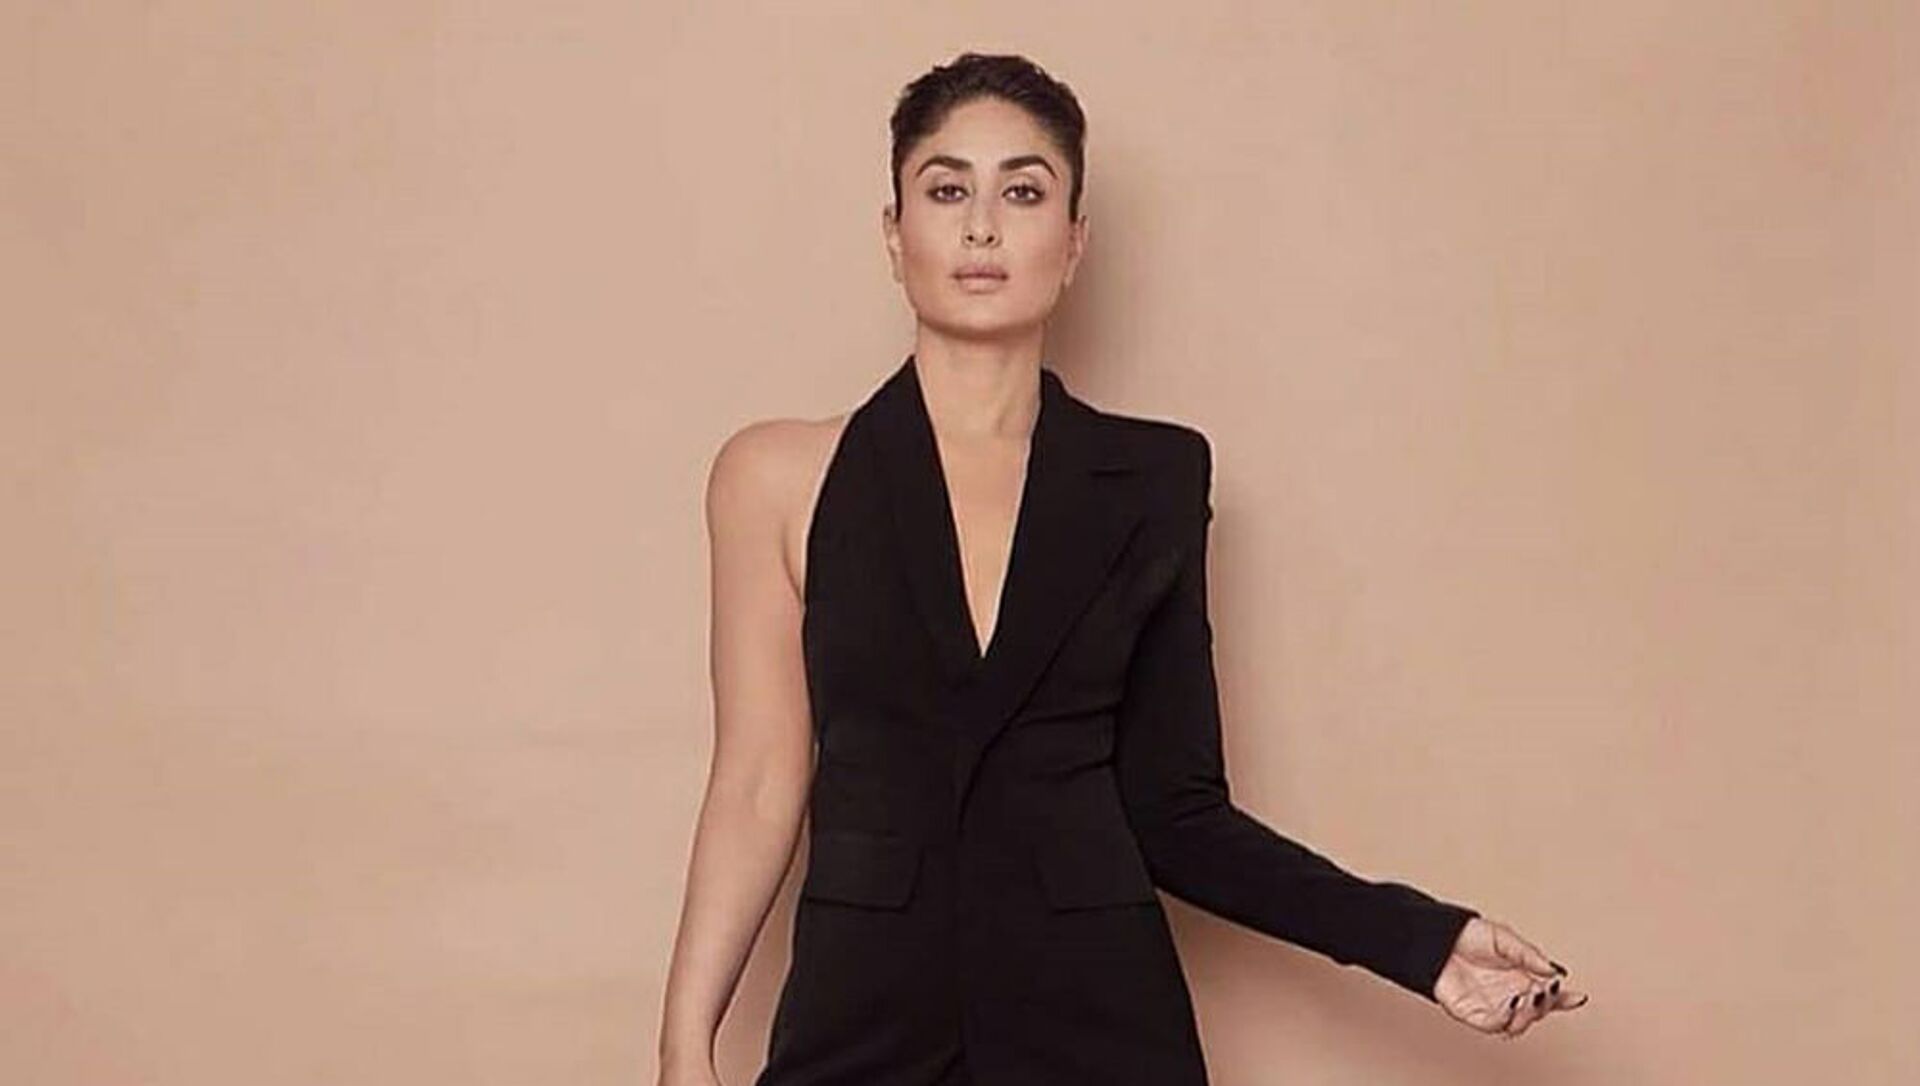 Indian superstar Kareena Kapoor Khan is no stranger to wowing her fans with her glamorous style. However, this time her outfit has left many of her fans, especially the Twitterati, chuckling. - Sputnik International, 1920, 15.07.2021